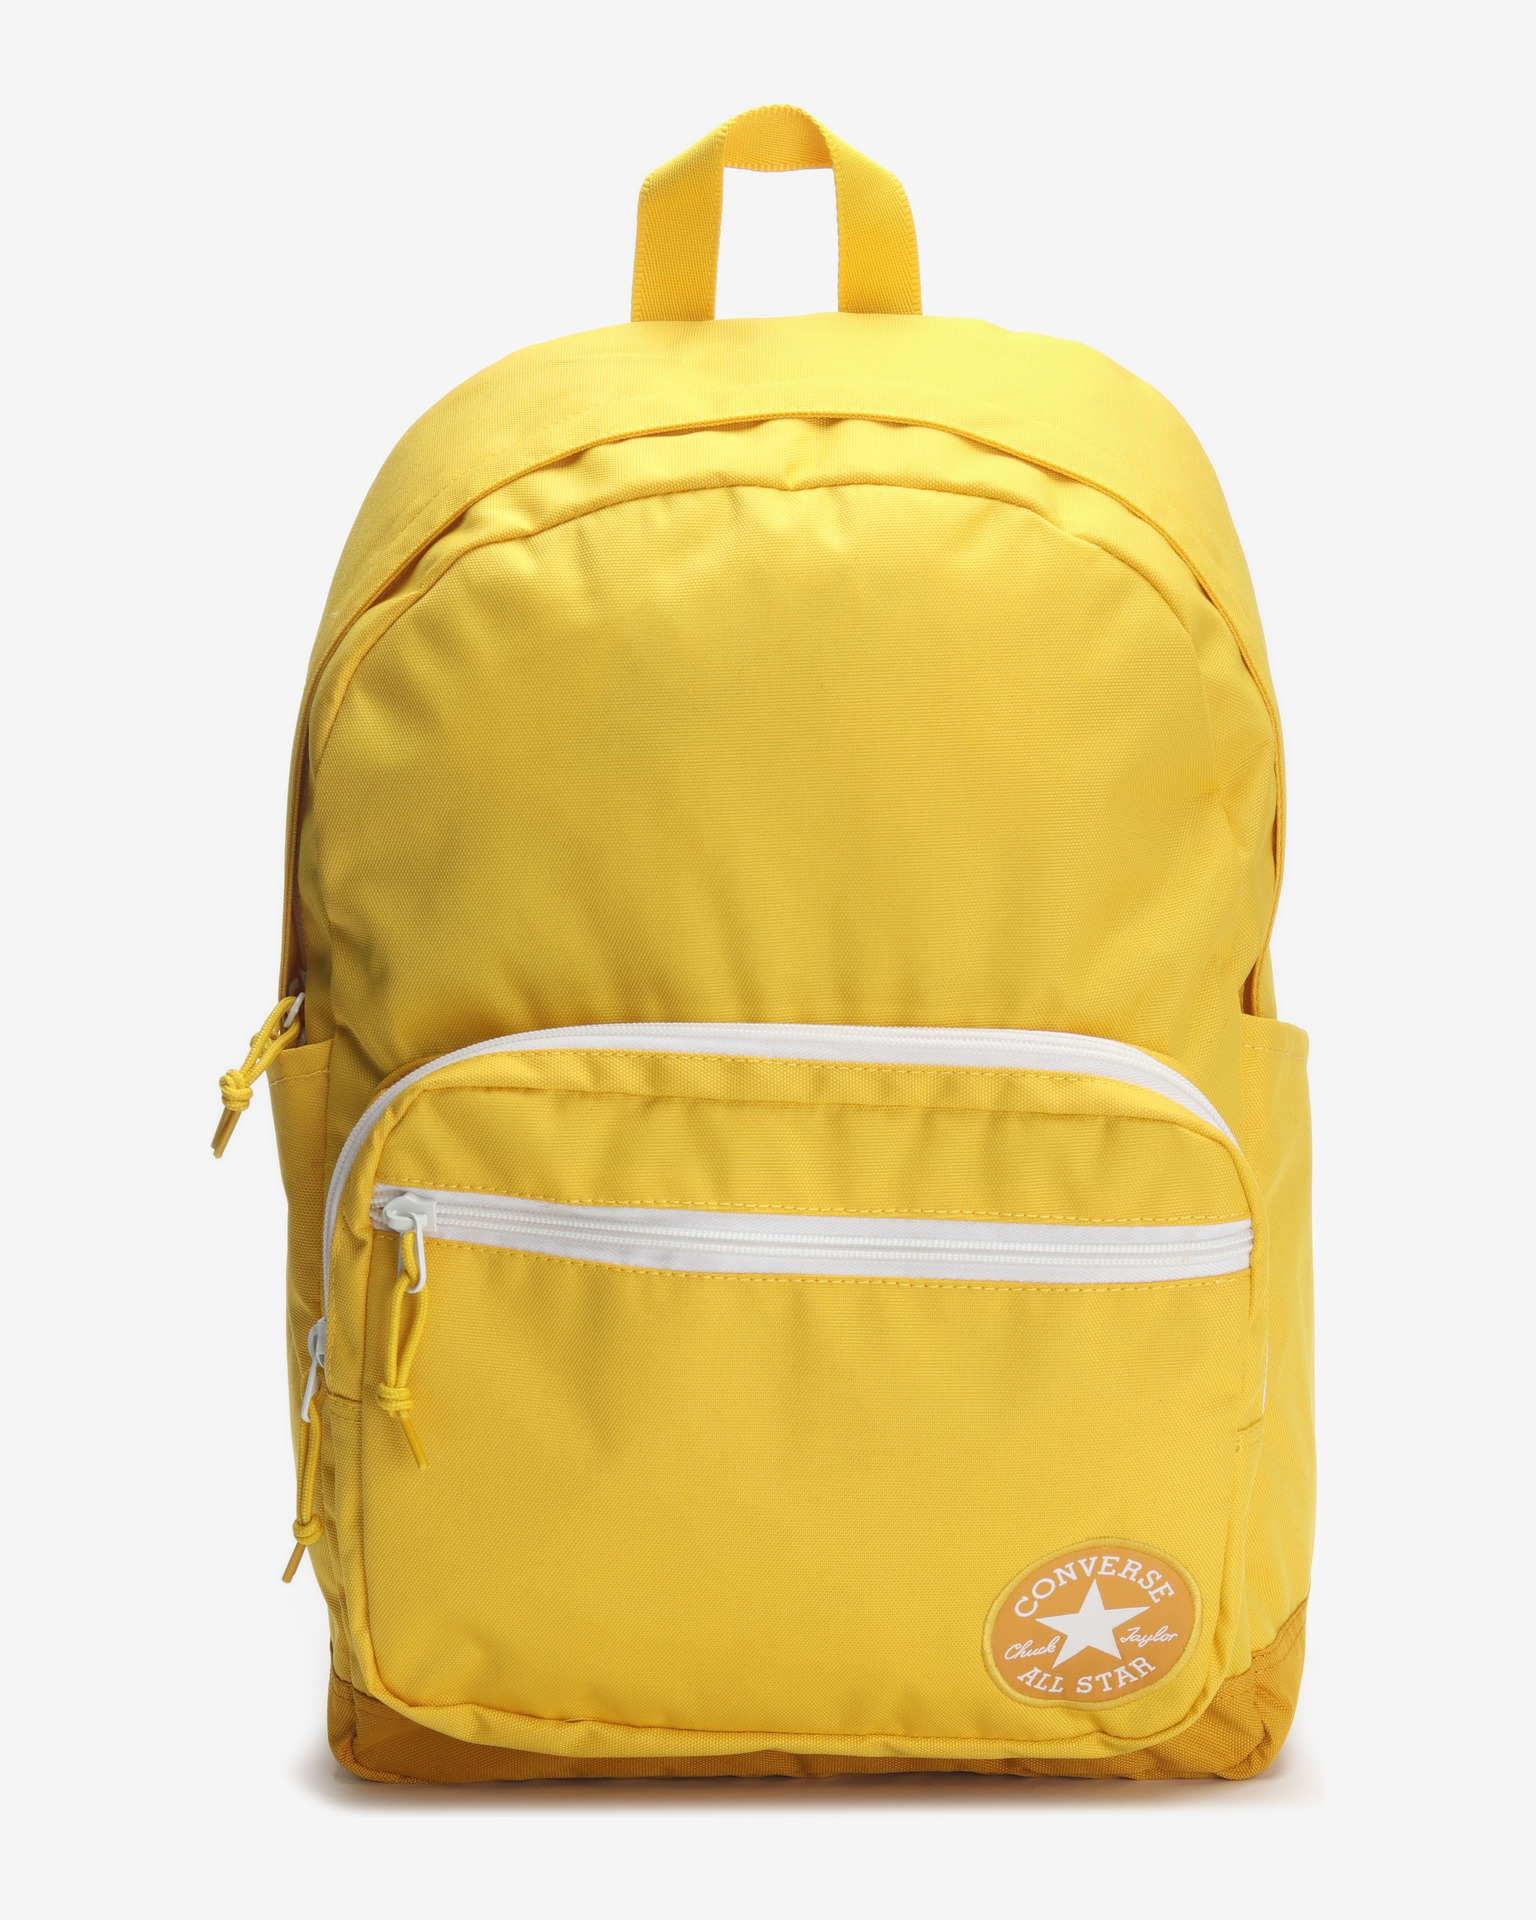 converse backpack yellow